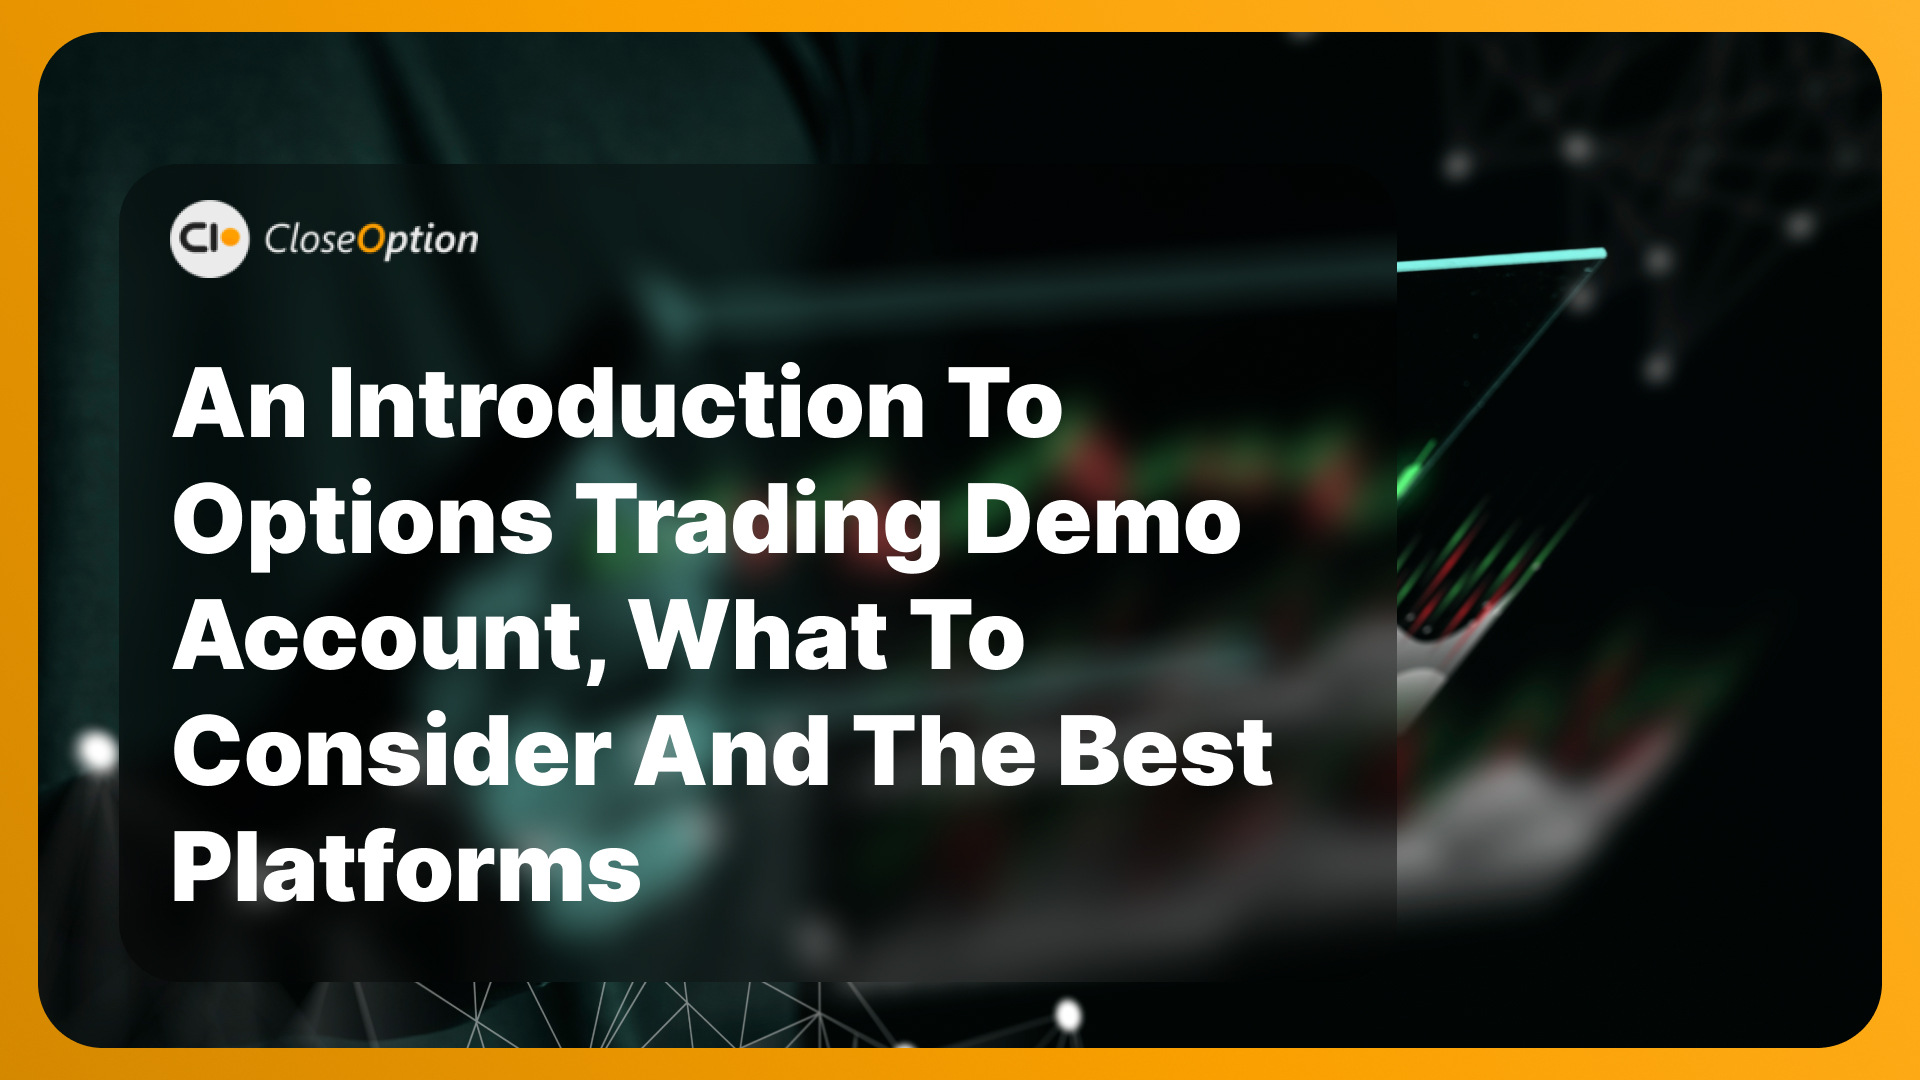 An Introduction to Options Trading Demo Account, What to Consider and the Best Platforms